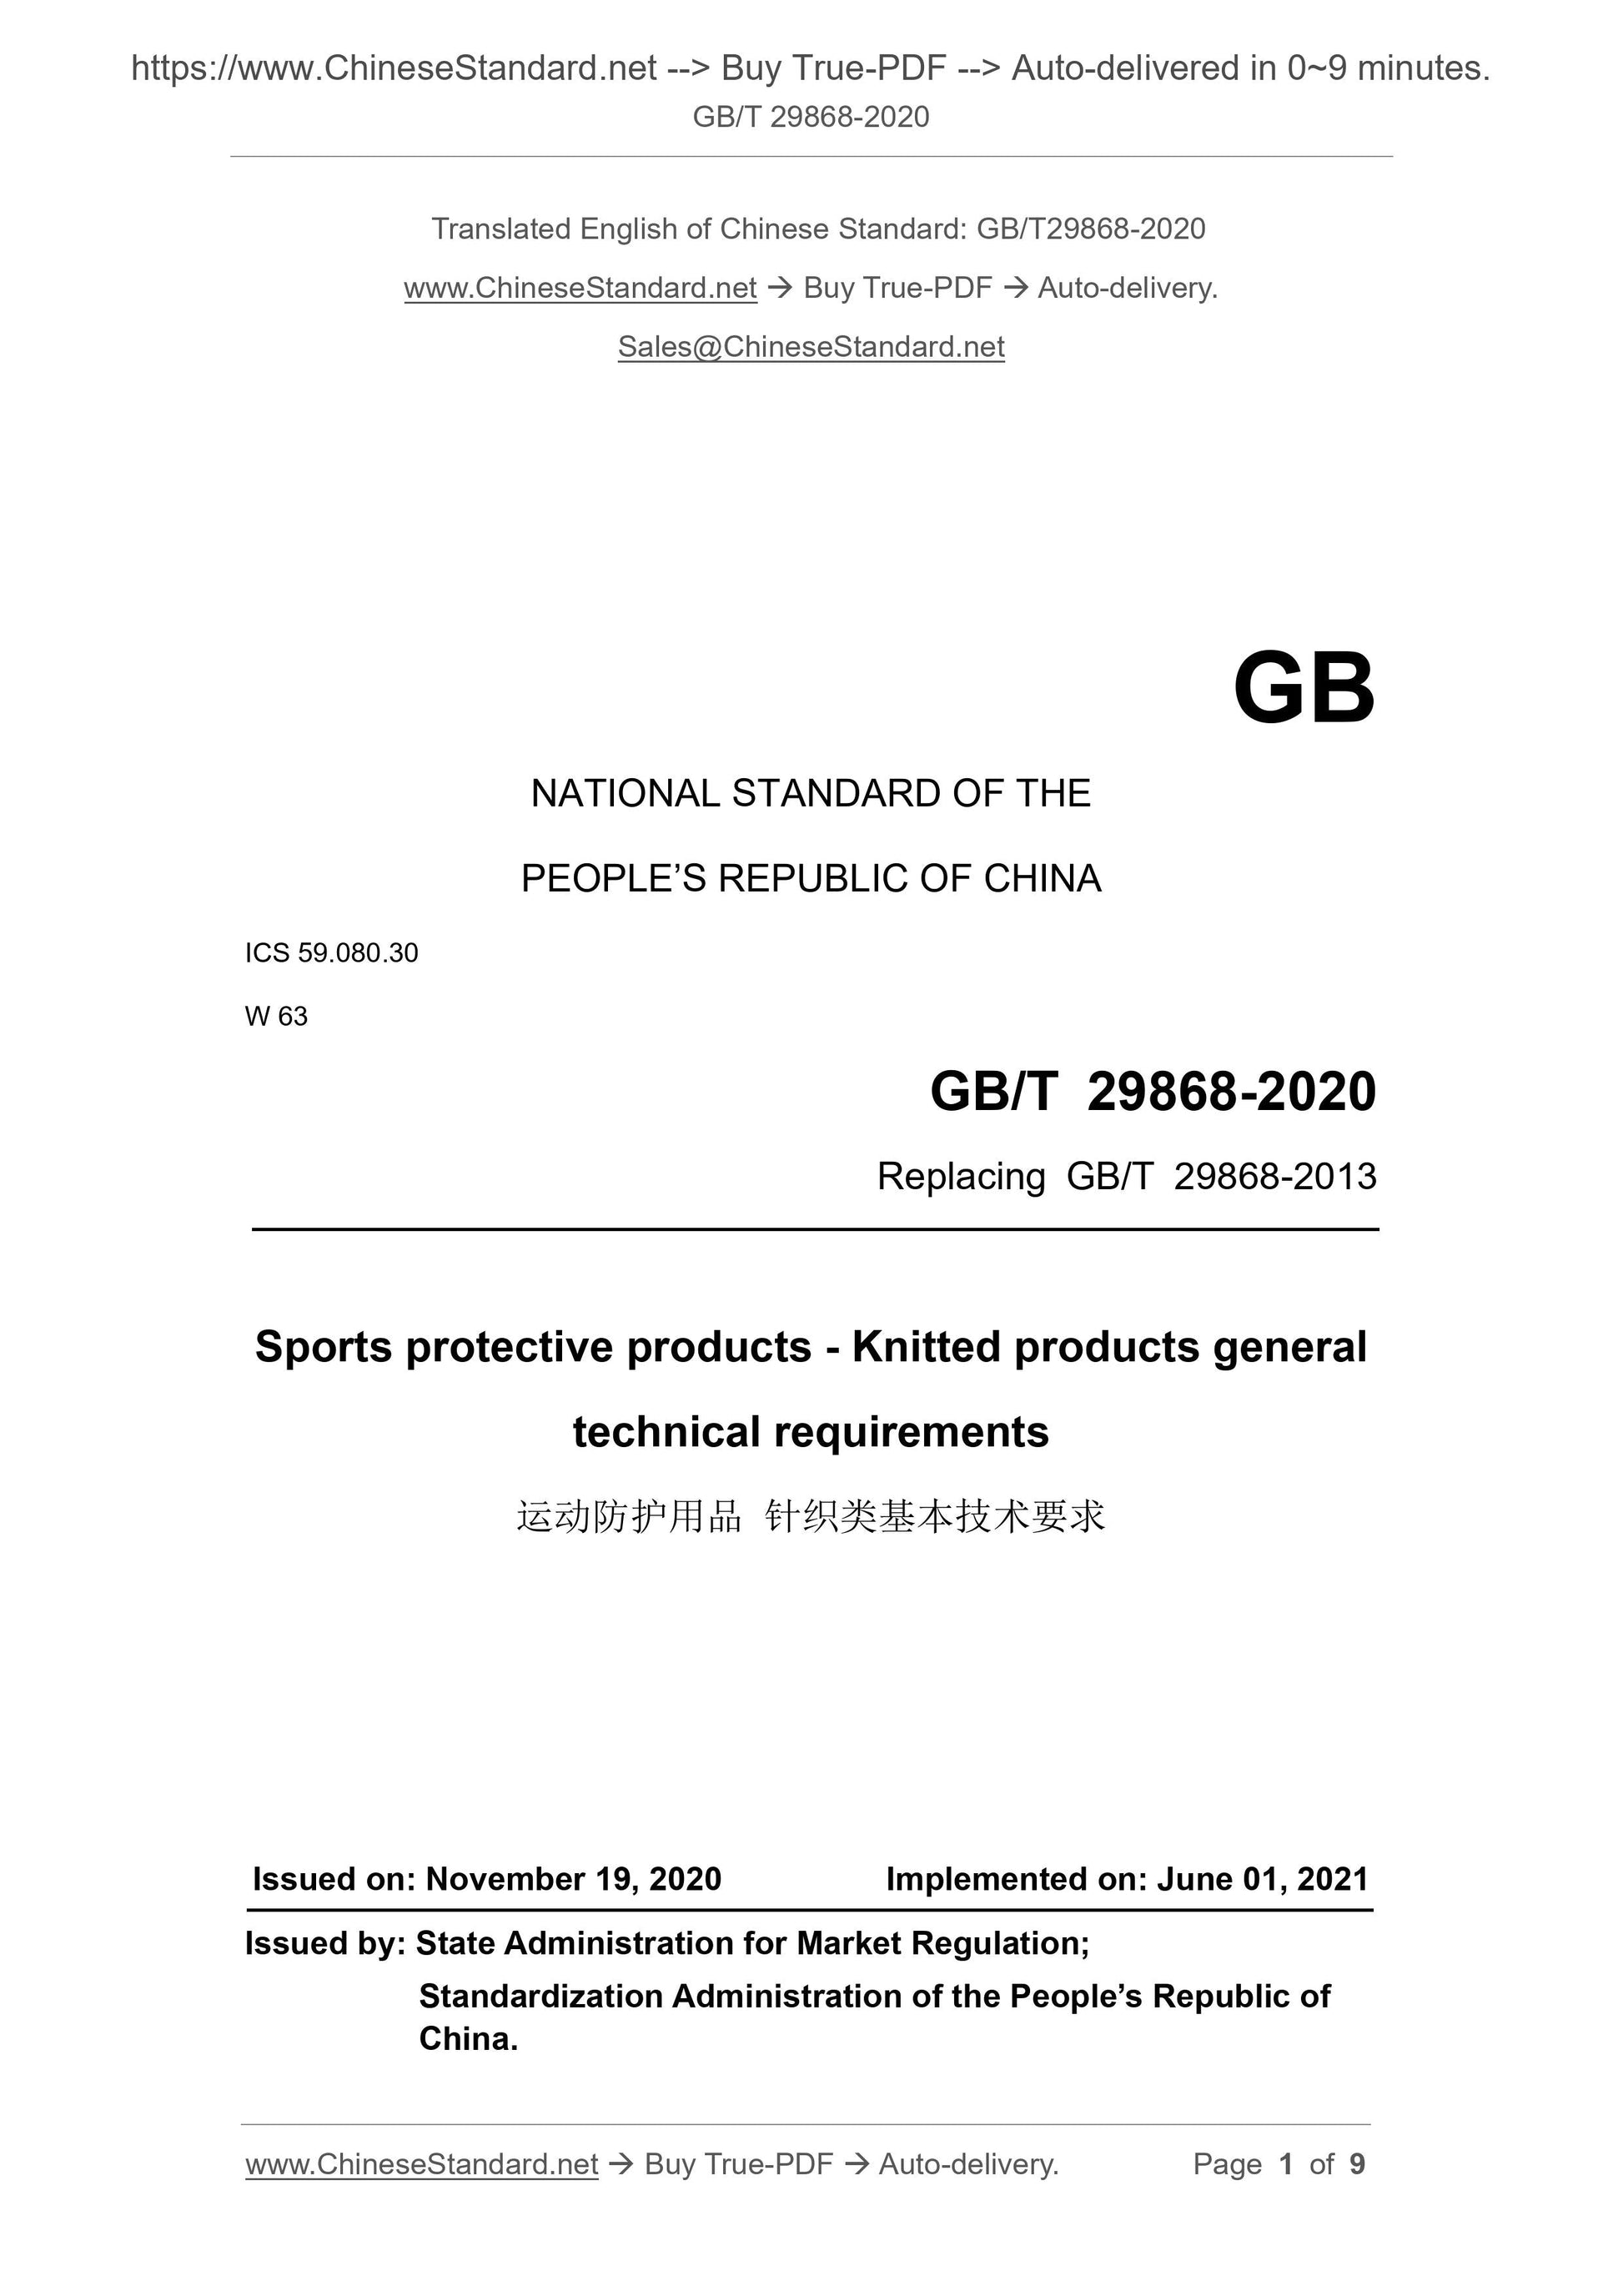 GB/T 29868-2020 Page 1